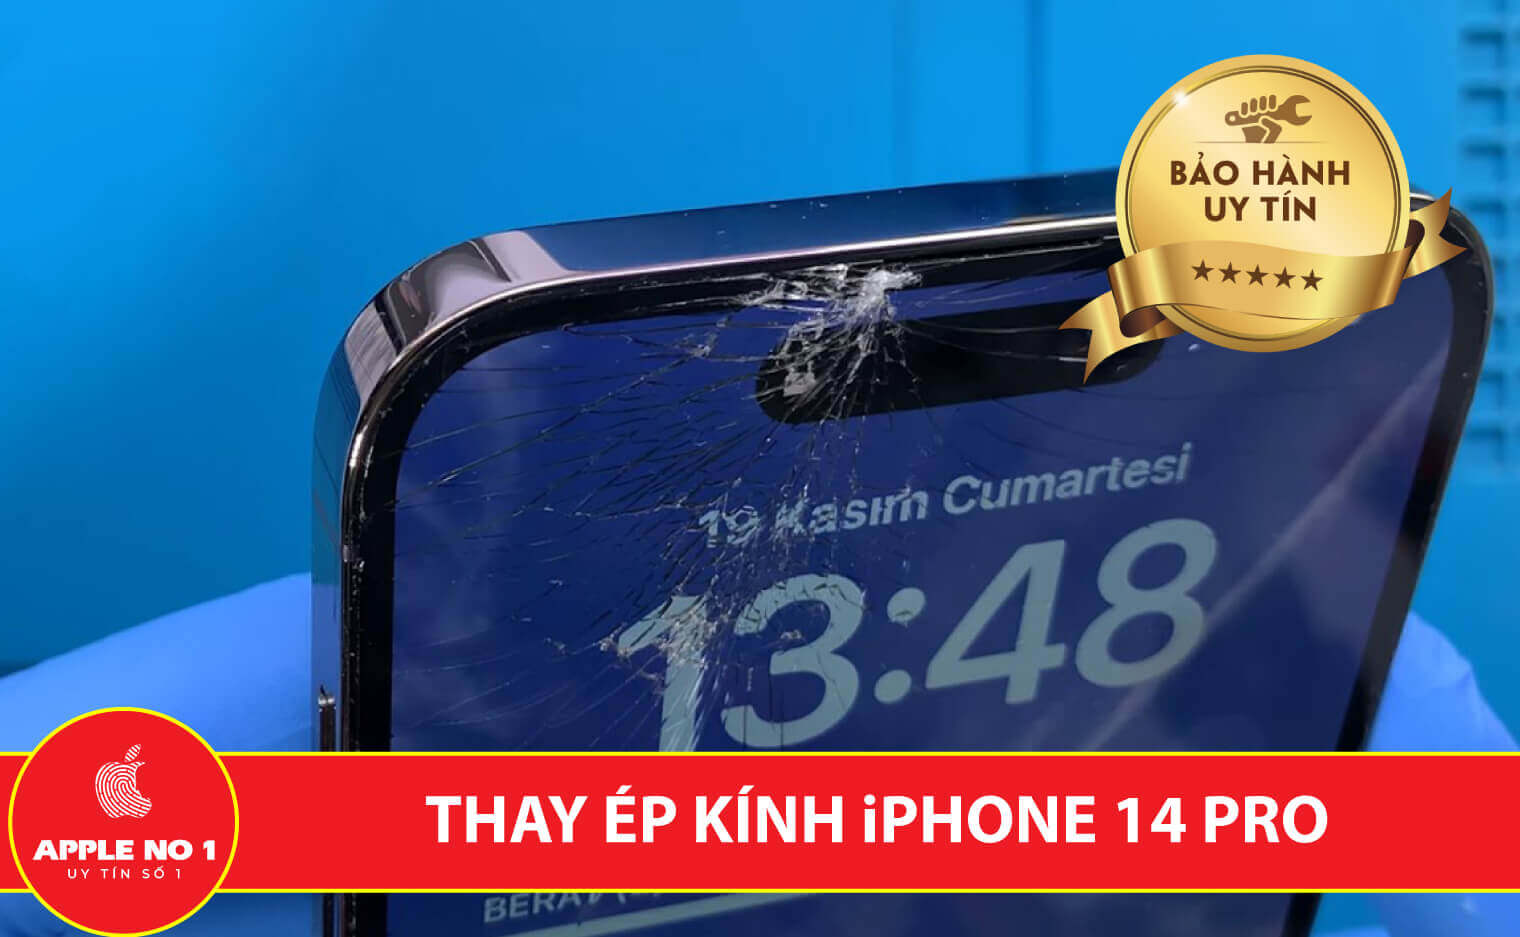 thay ep kinh iphone 14 pro